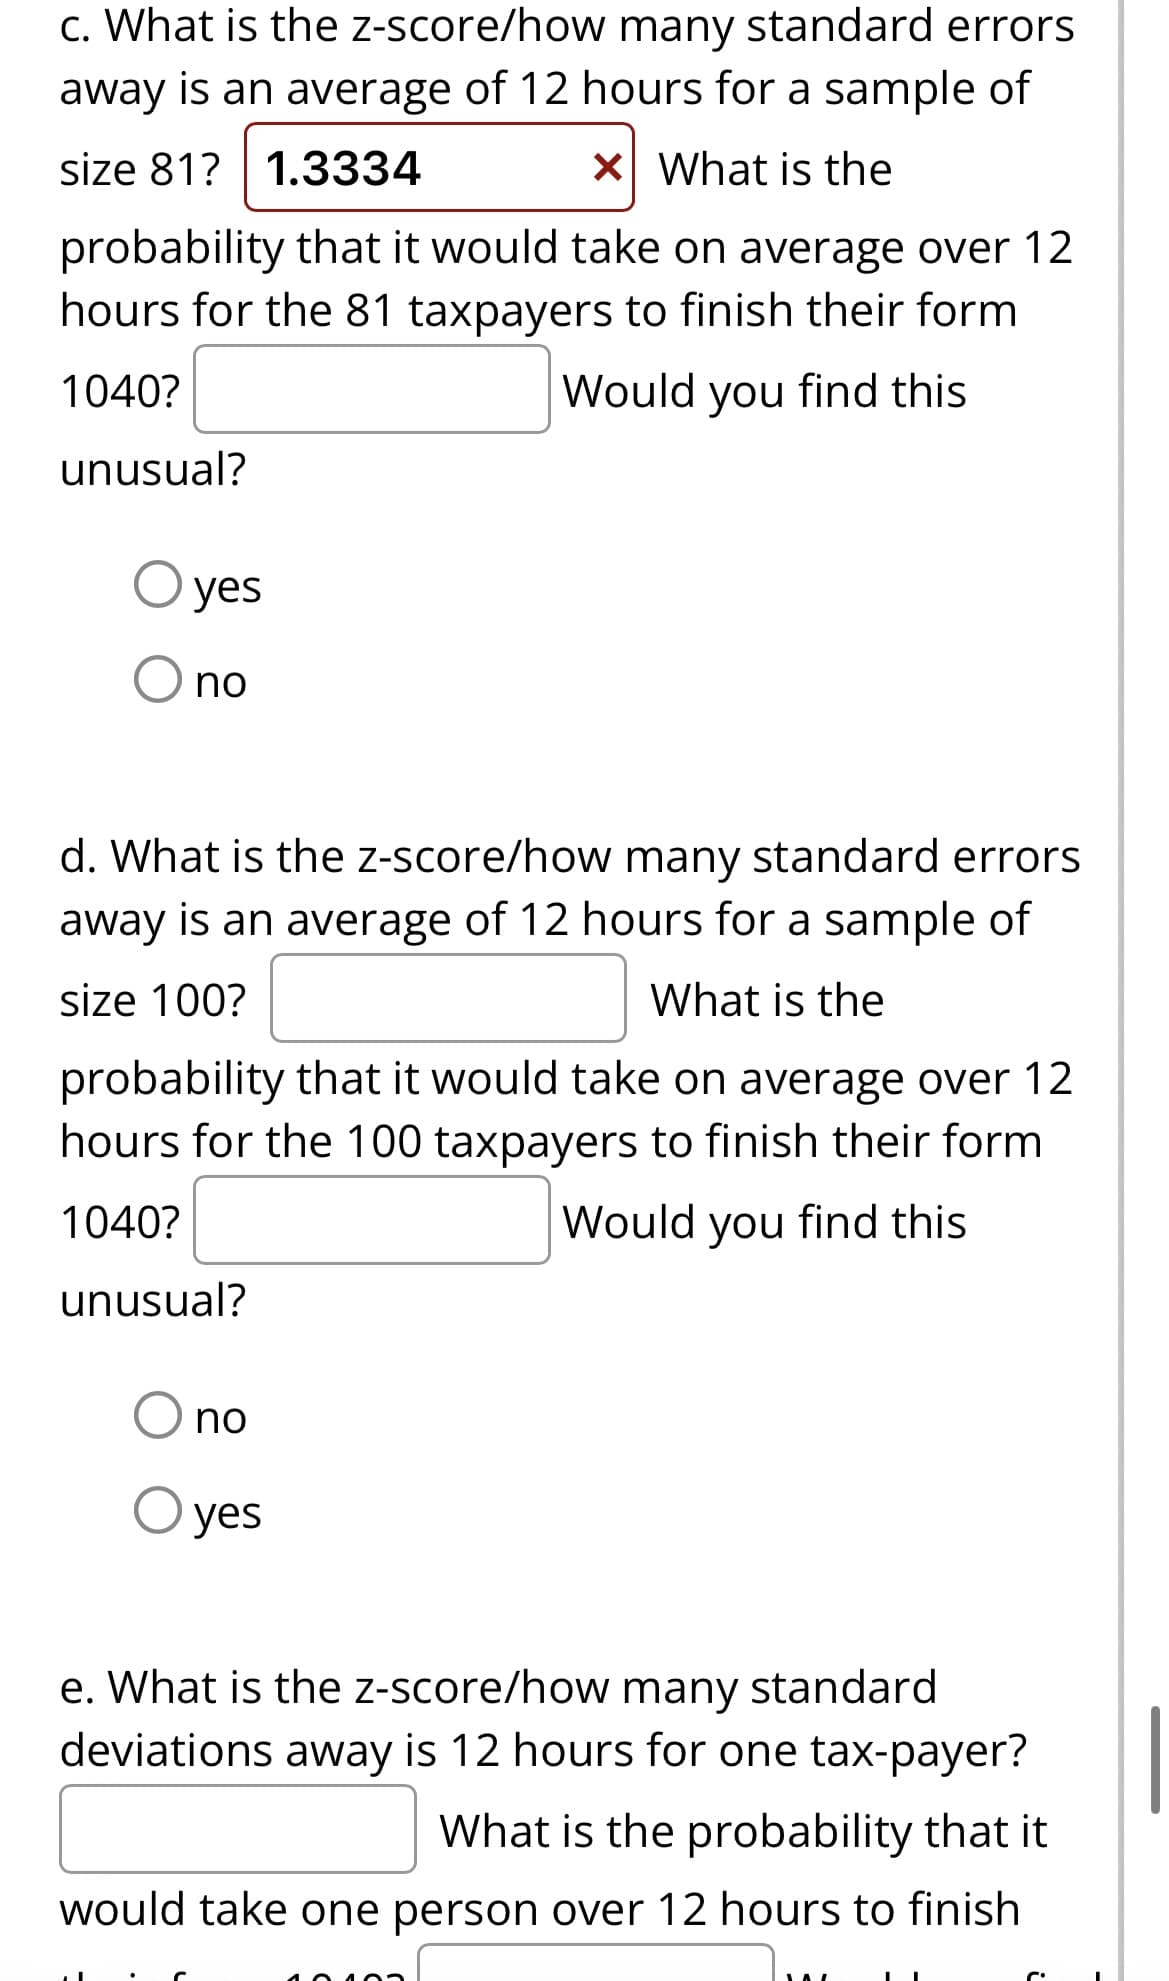 c. What is the
z-score/how many standard errors.
away is an average of 12 hours for a sample of
size 81? 1.3334
x What is the
probability that it would take on average over 12
hours for the 81 taxpayers to finish their form
1040?
Would you find this
unusual?
yes
no
d. What is the z-score/how many standard errors
away is an average of 12 hours for a sample of
size 100?
What is the
probability that it would take on average over 12
hours for the 100 taxpayers to finish their form
1040?
Would you find this
unusual?
O no
O yes
e. What is the z-score/how many standard
deviations away is 12 hours for one tax-payer?
What is the probability that it
would take one person over 12 hours to finish